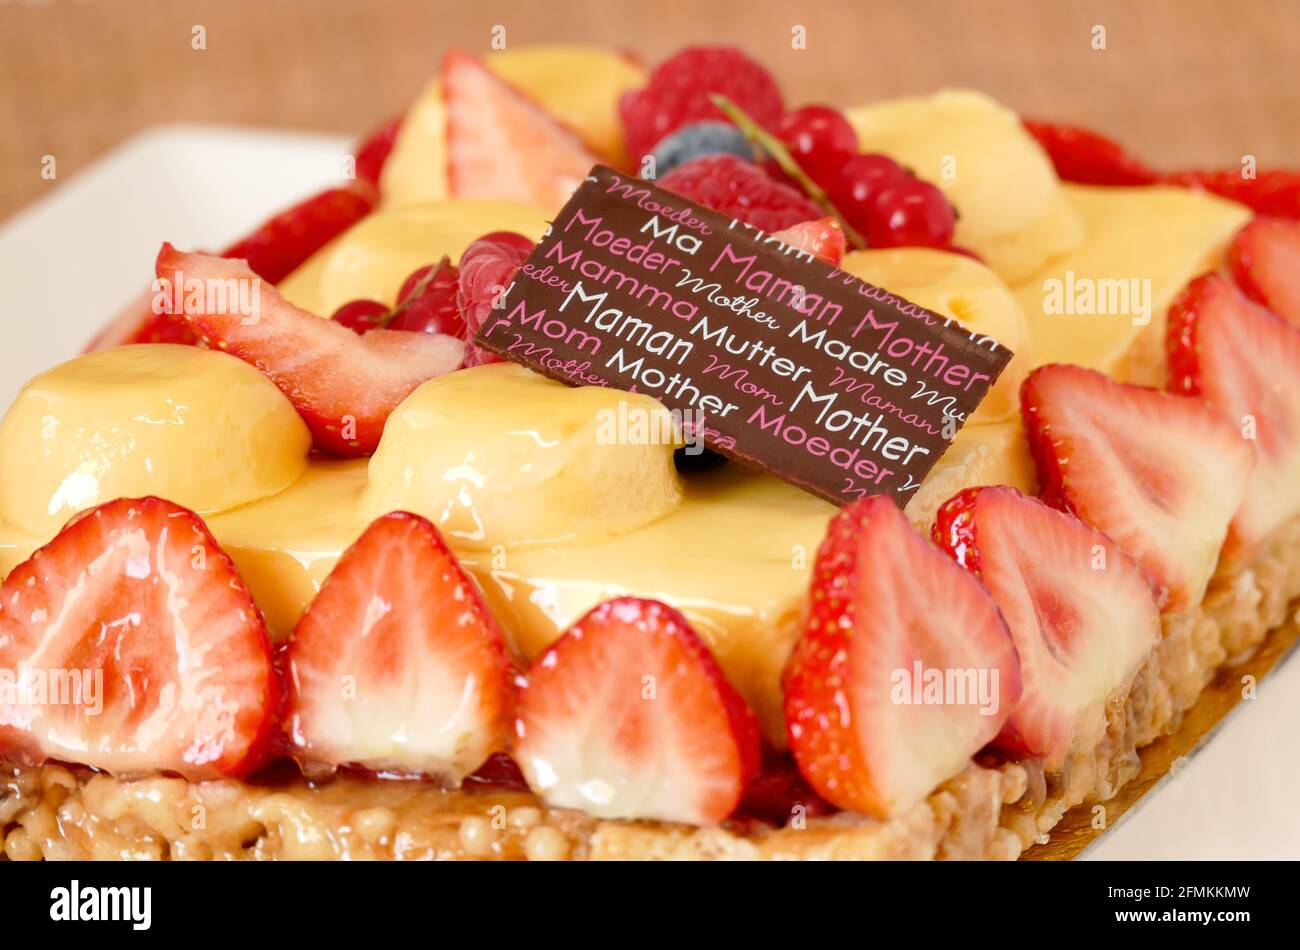 Motherday fruit tart closeup, yellow cream with passion fruit flavor and red berries coulis and strawberries on caramel crust Stock Photo